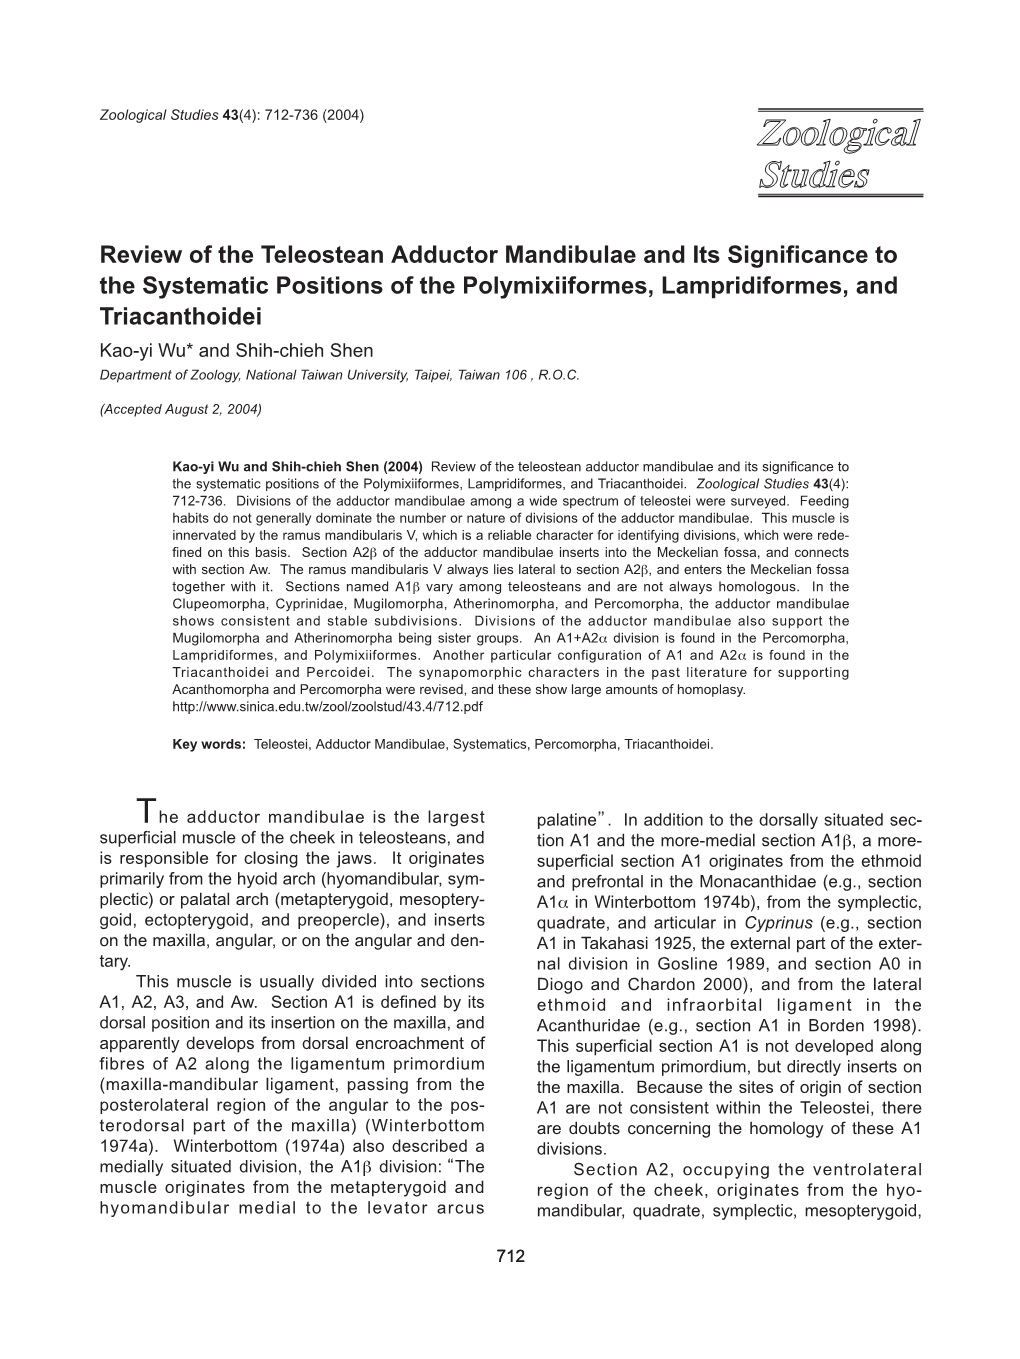 Review of the Teleostean Adductor Mandibulae and Its Significance To